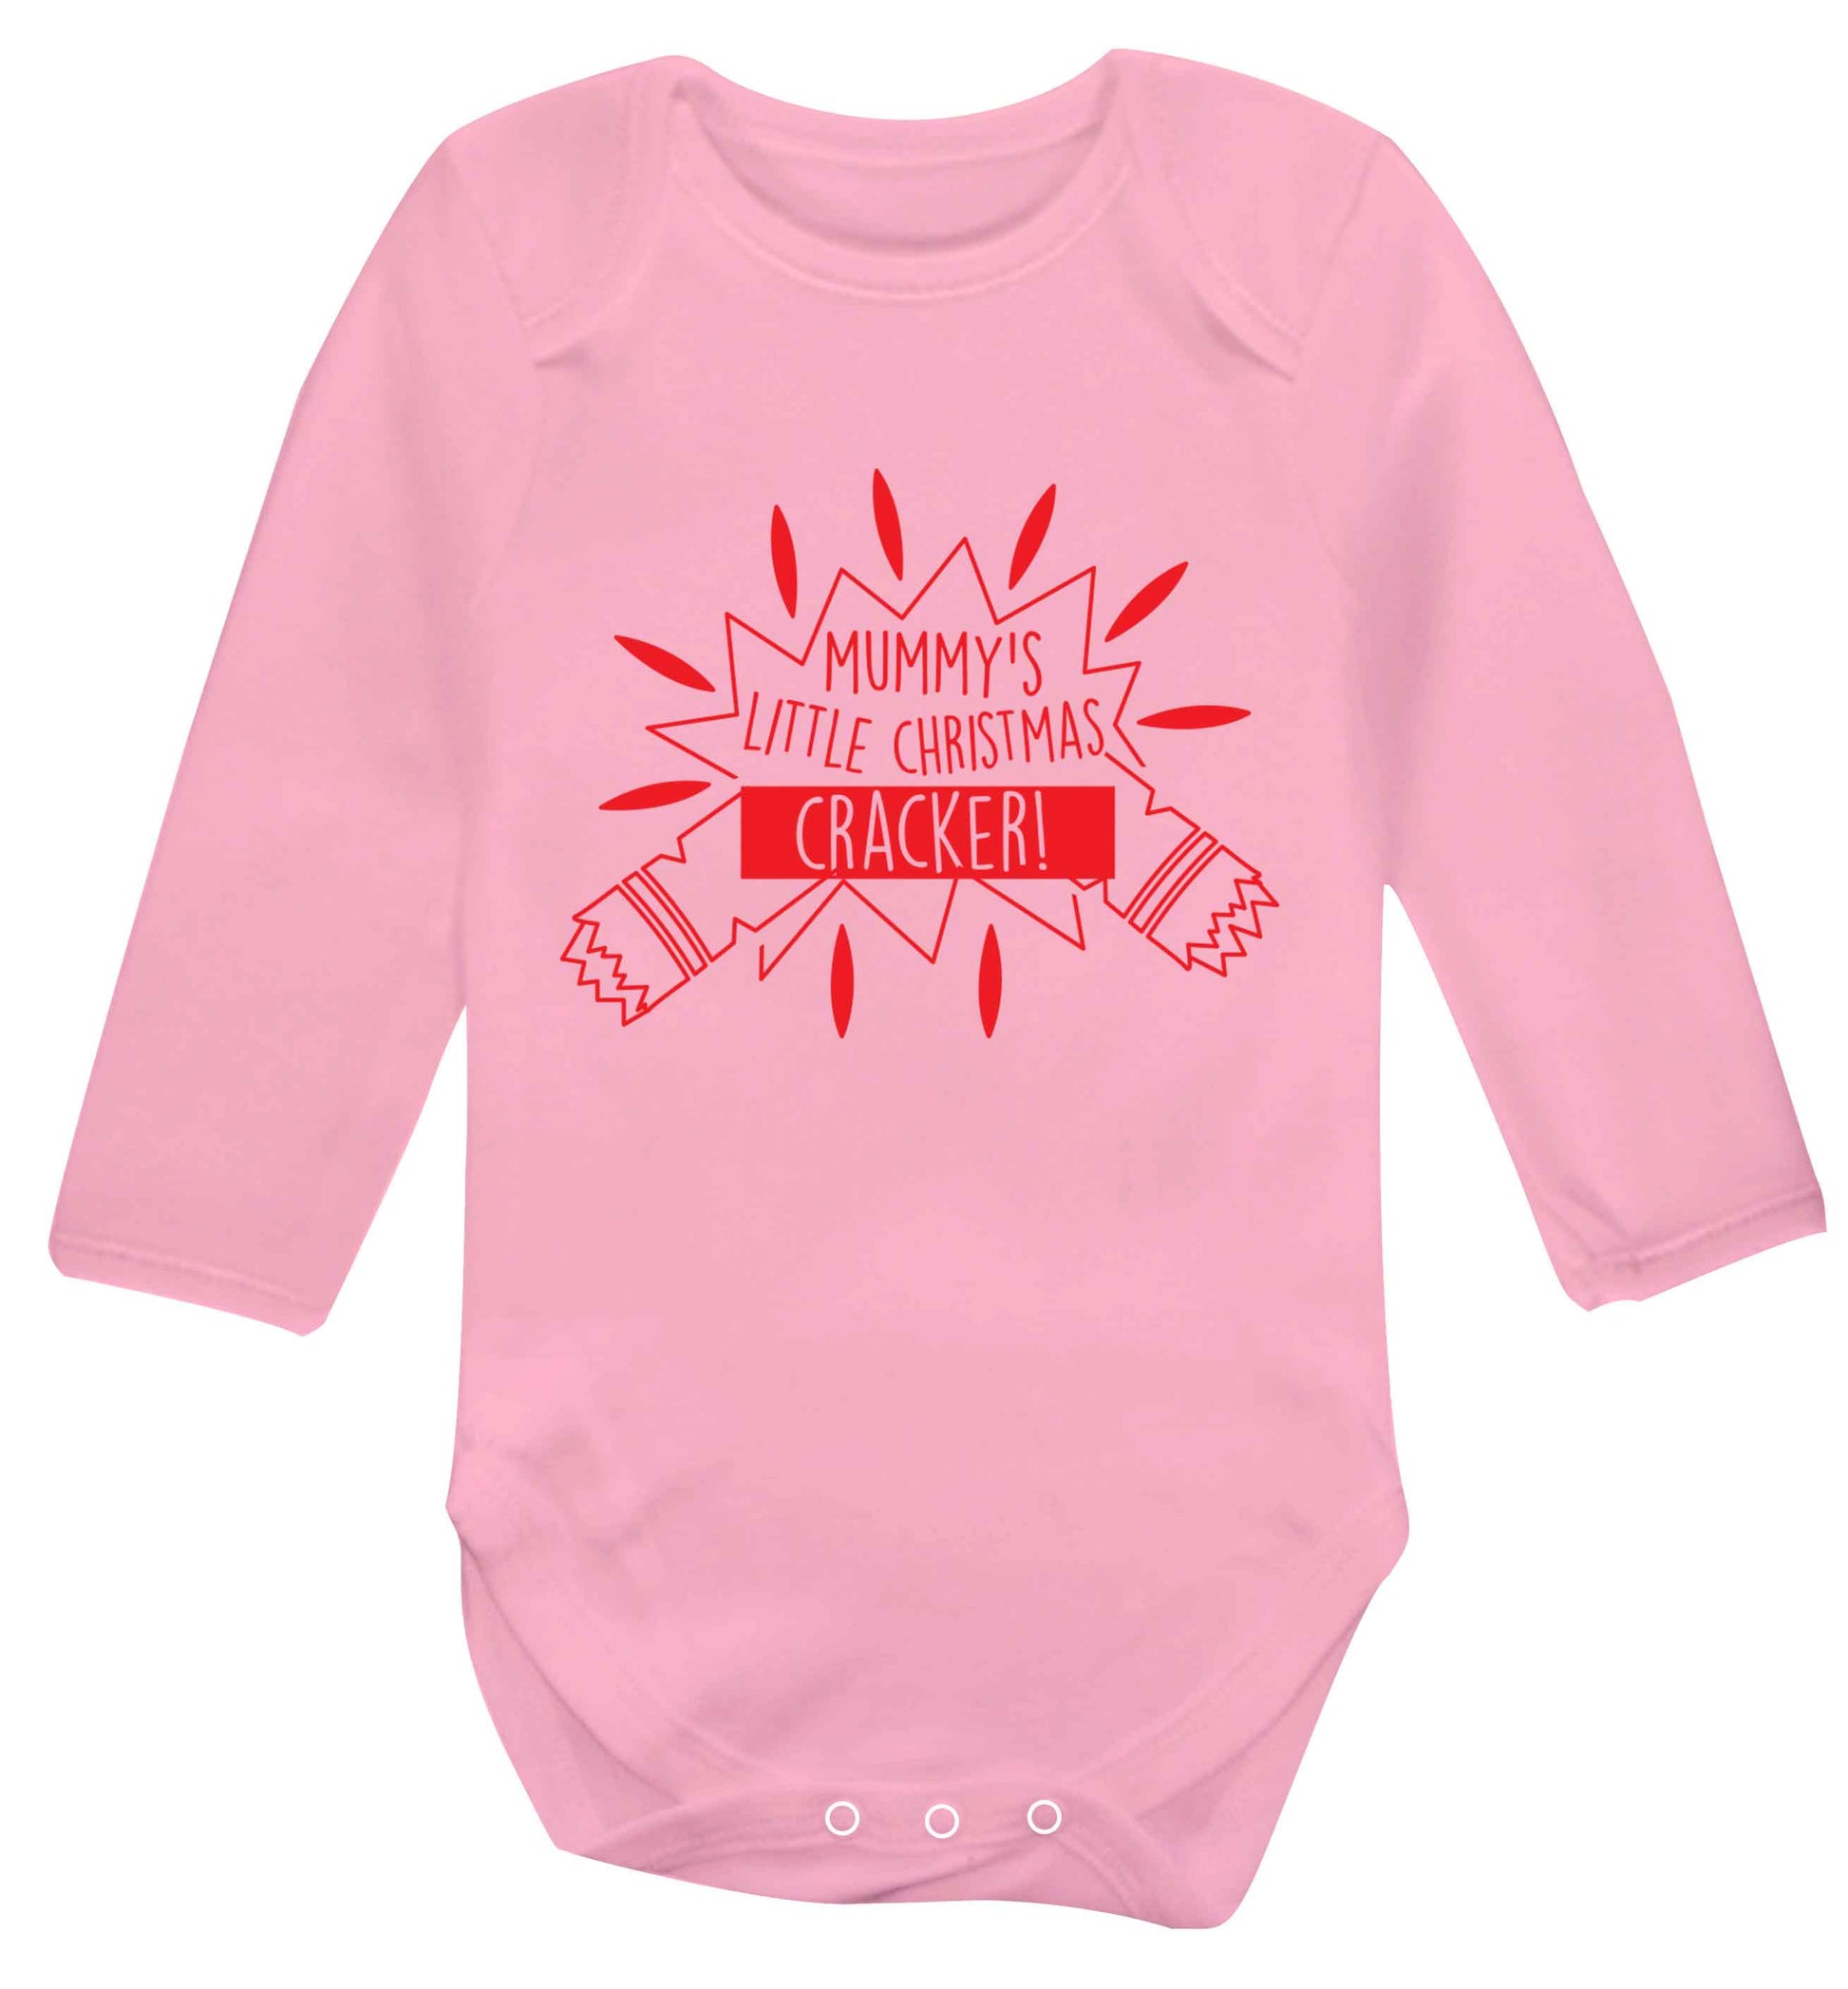 Mummy's little christmas cracker Baby Vest long sleeved pale pink 6-12 months